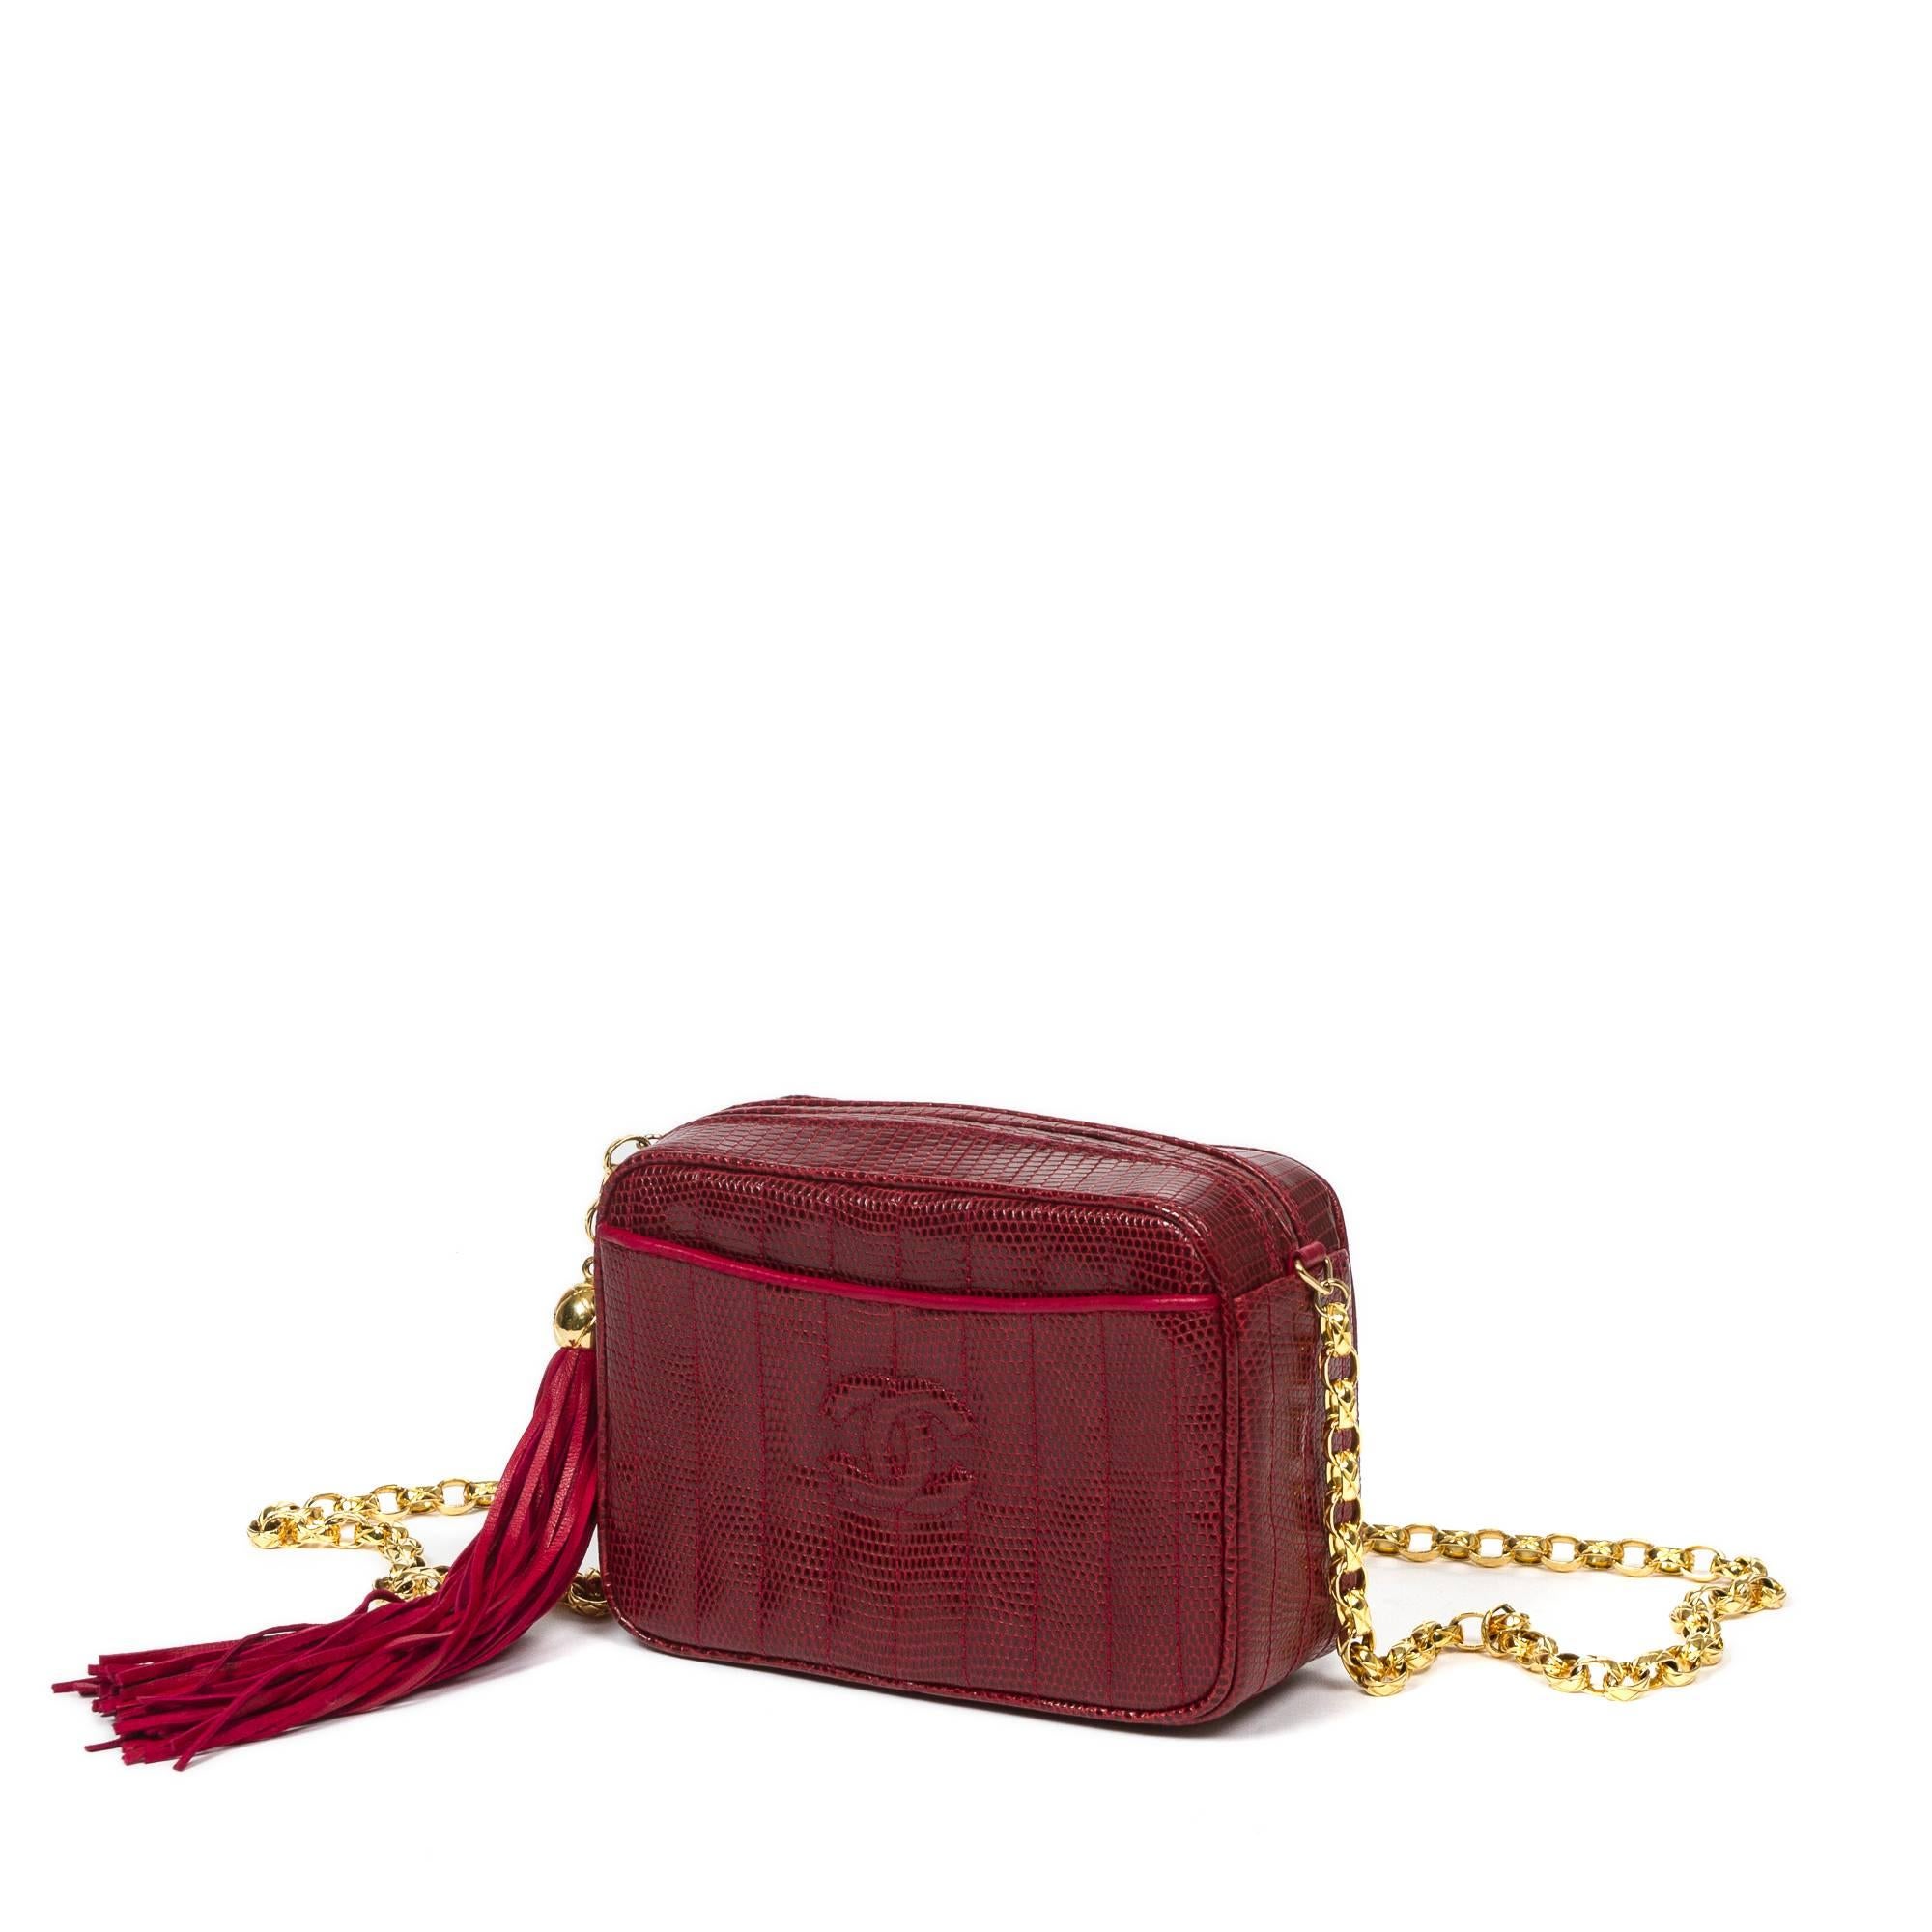 Vintage Tassel Camera Bag in garnet red lizard skin with thick link gold tone chain strap. 2 exterior slip pockets with red leather piping. Zip closure with red leather tassel zipper toggle. Black leather lined interior with one zip pocket. Gold